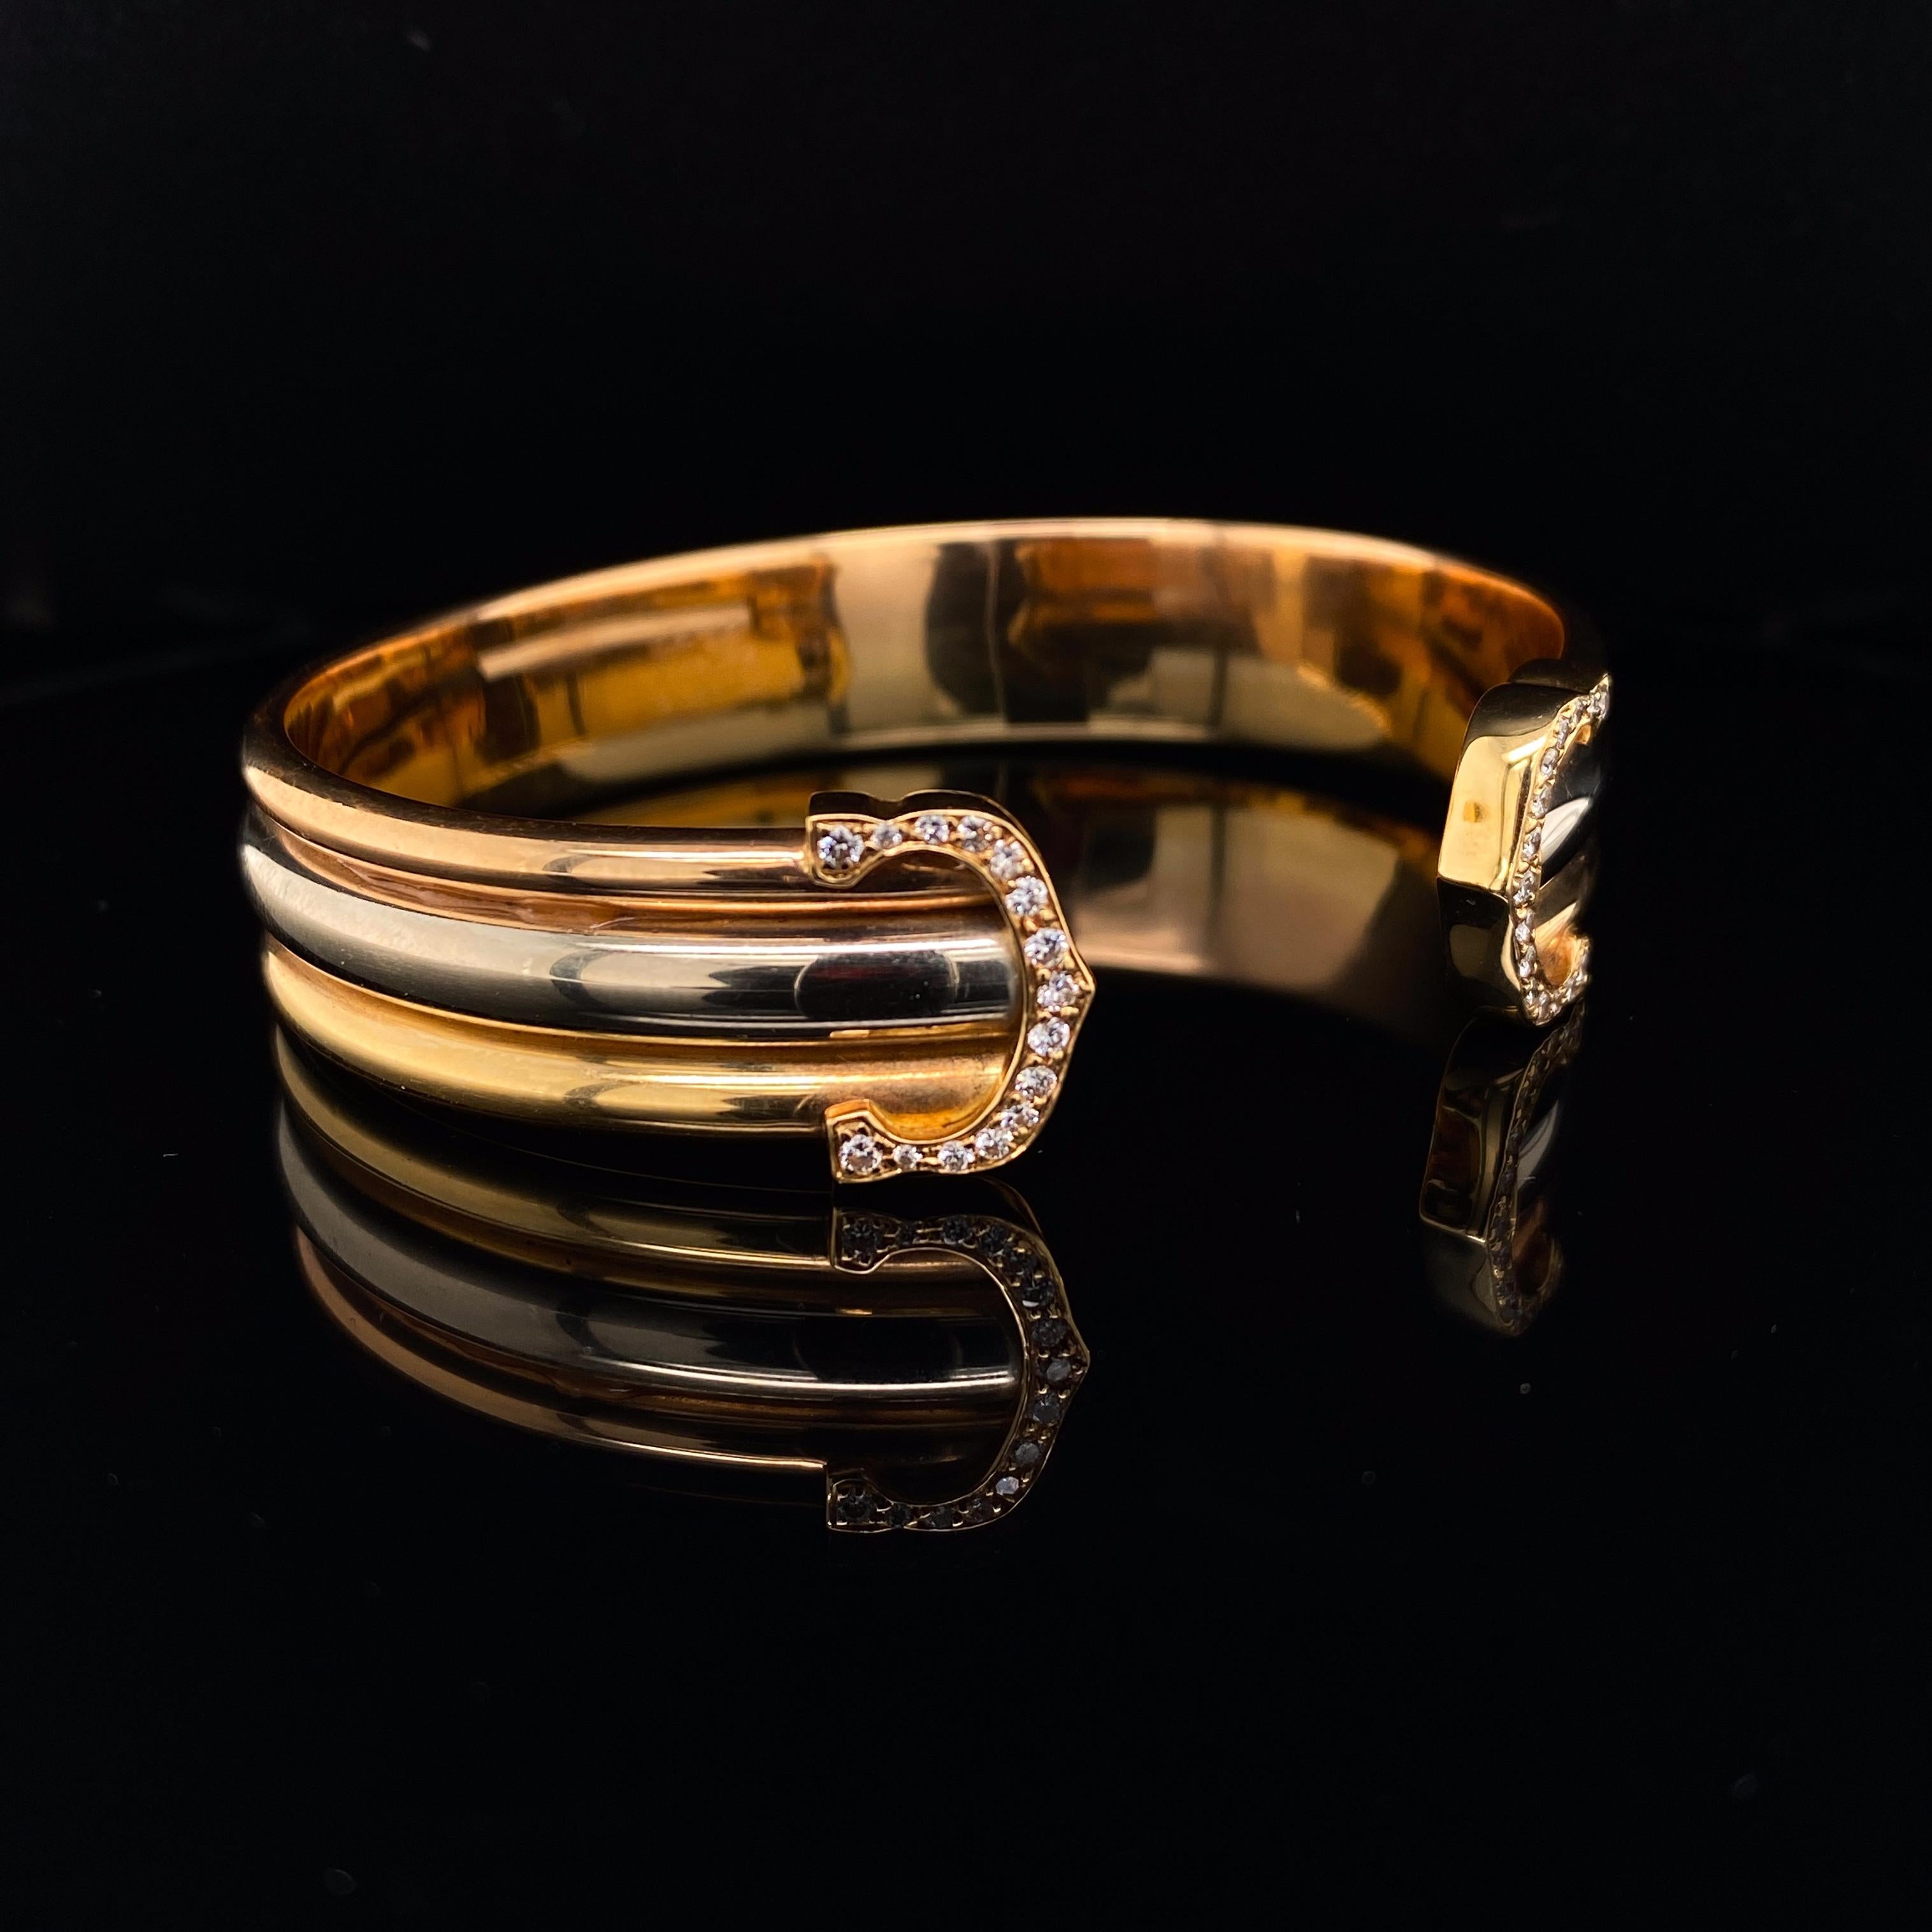 Cartier Trinity 18 Karat Yellow White and Rose Gold Cuff Bracelet

This classic, wearable Cartier Trinity tri-colour gold open cuff bracelet features two diamond set C's, one terminating either end of the piece.
The round brilliant cut diamonds are